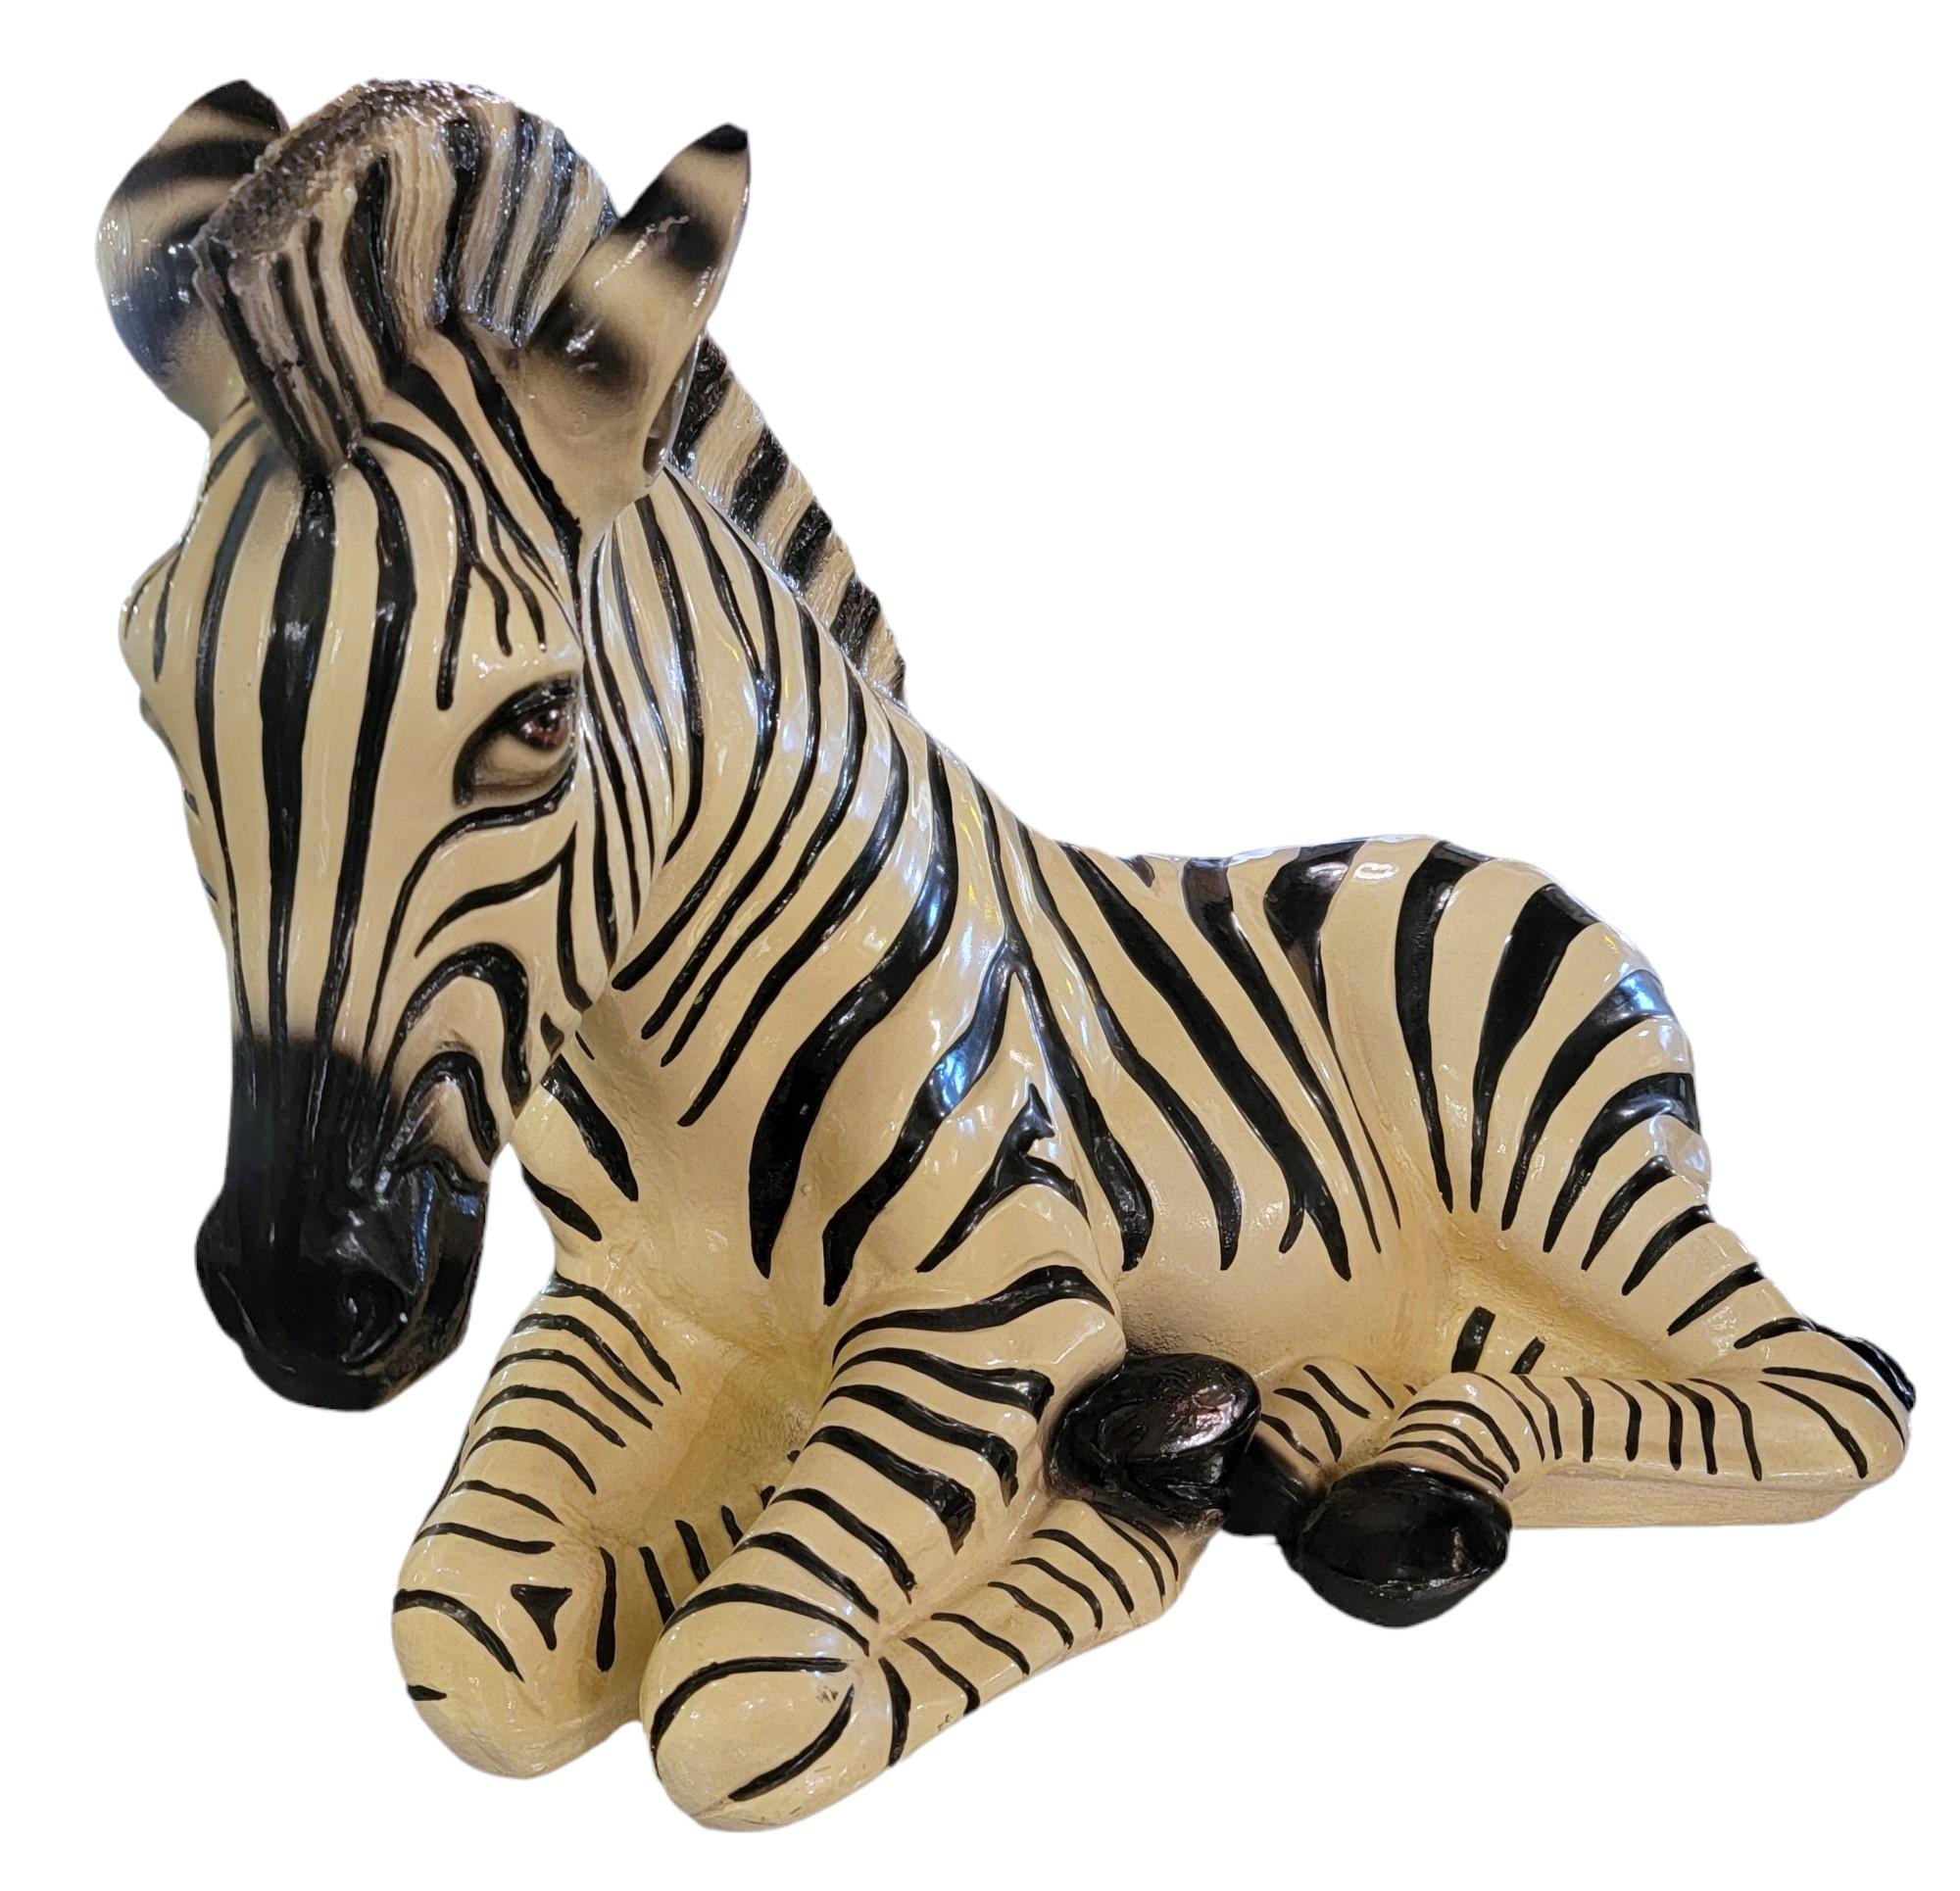 1970s Marwal Industries Baby Resin Zebra Sculpture In Good Condition For Sale In Pasadena, CA